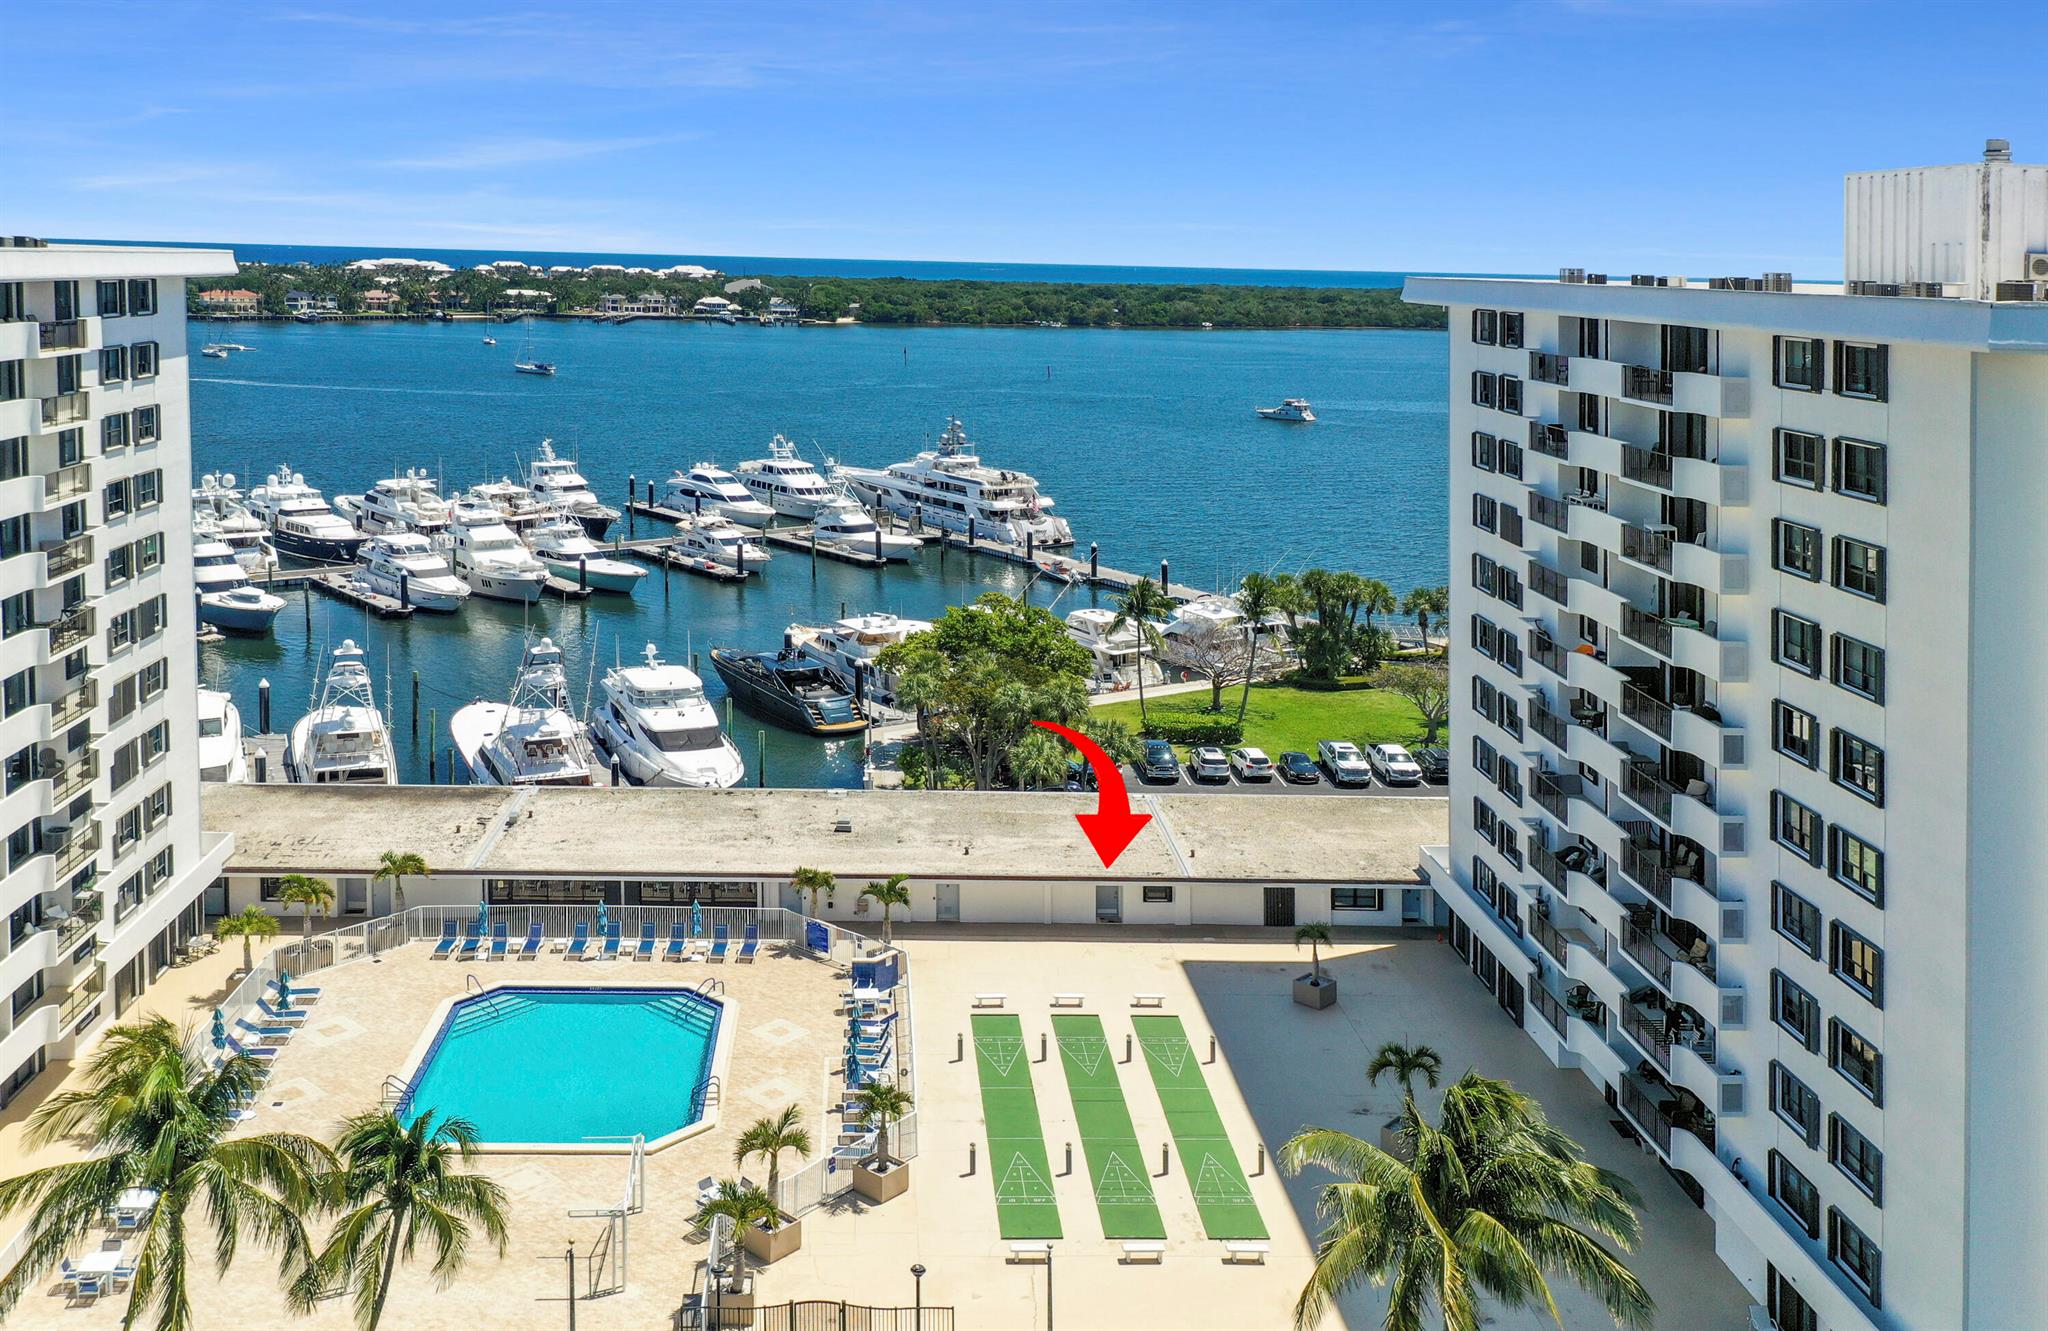 Priced For Quick Sale! It's all about the view & this marina view Garden Unit is marvelous!  This 1/1 in prestigious Old Port Cove is on the pool deck floor & has no one above or below making this unit unique in condo living. It is the closest to the heated pool, sauna & club room.  Unit features an oversized 240 Sq ft balcony with marina and intracoastal views, stainless steel appliances, granite counter tops, lots of storage including a walk in closet,  accordian hurricane shutters & new paint. Community also includes 24 hour manned gate, reading/game room, 2 mile walking path, tennis and community laundry.   Washer/dryer is allowed to be installed in unit.  Fees include cable, internet, water, trash, sewer, manned gate.  Nearby pristine beaches, shopping, entertainment and 20 min to PB